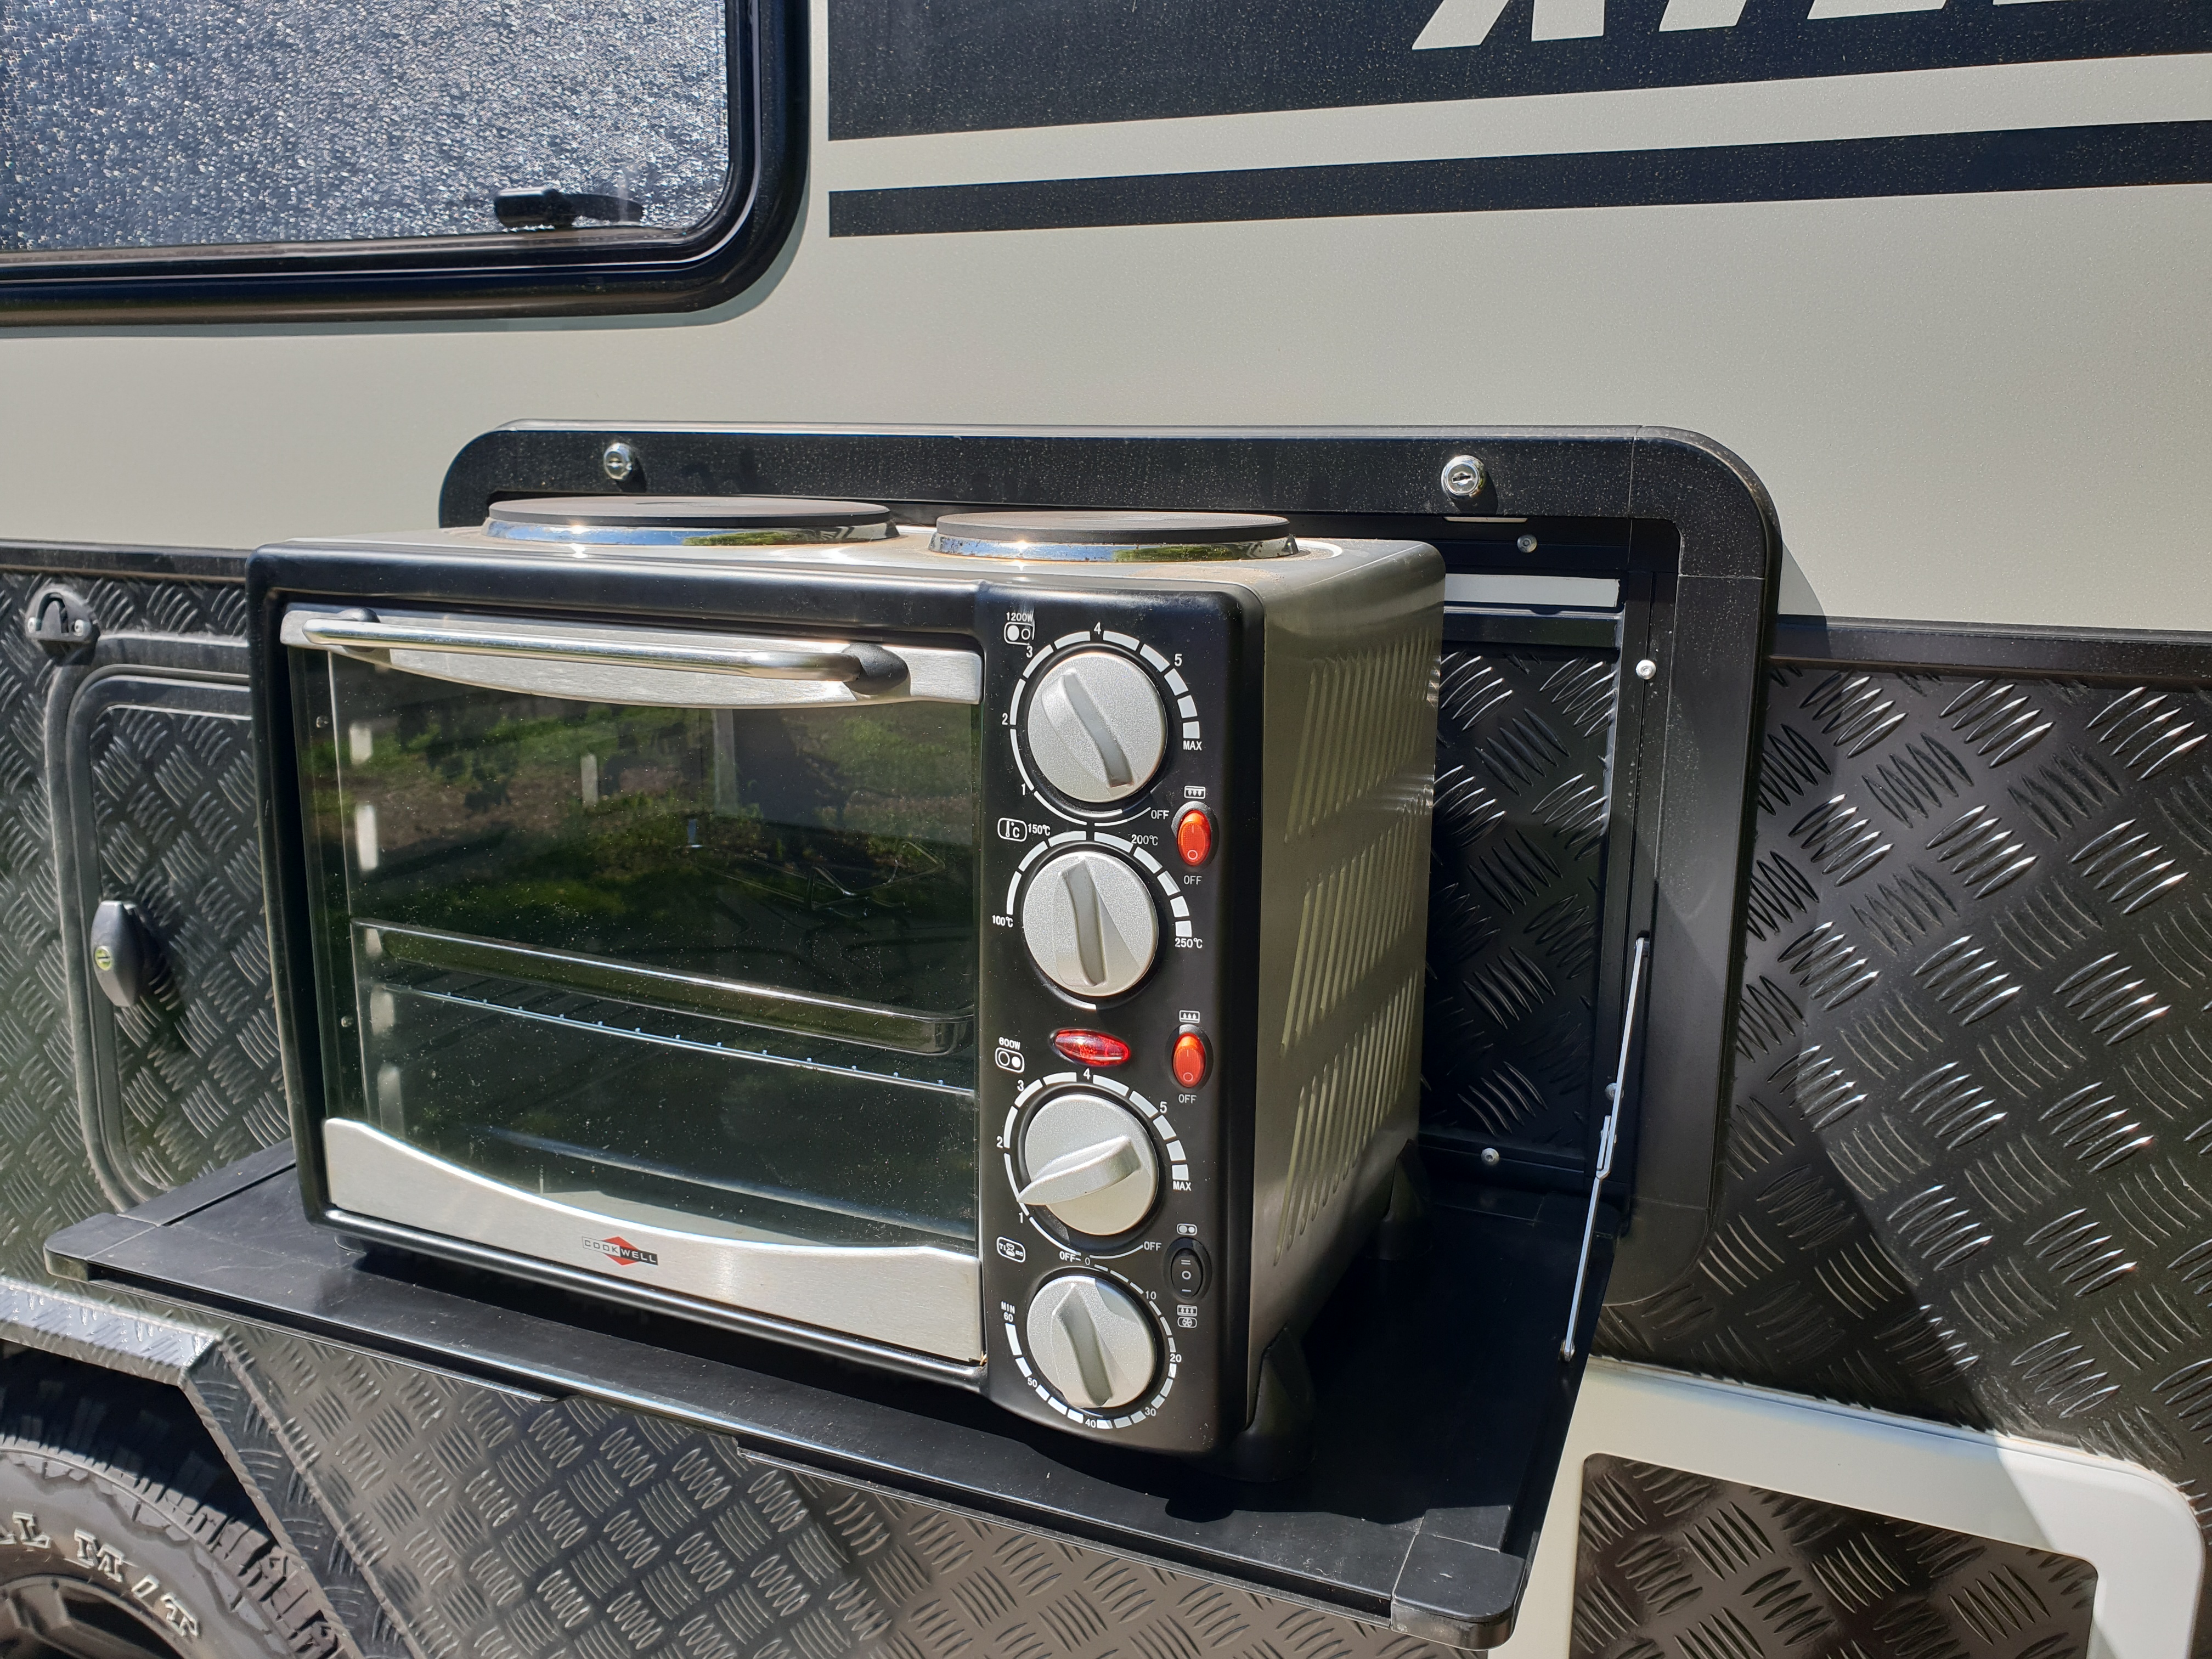 Do You Need an Oven in Your Caravan?